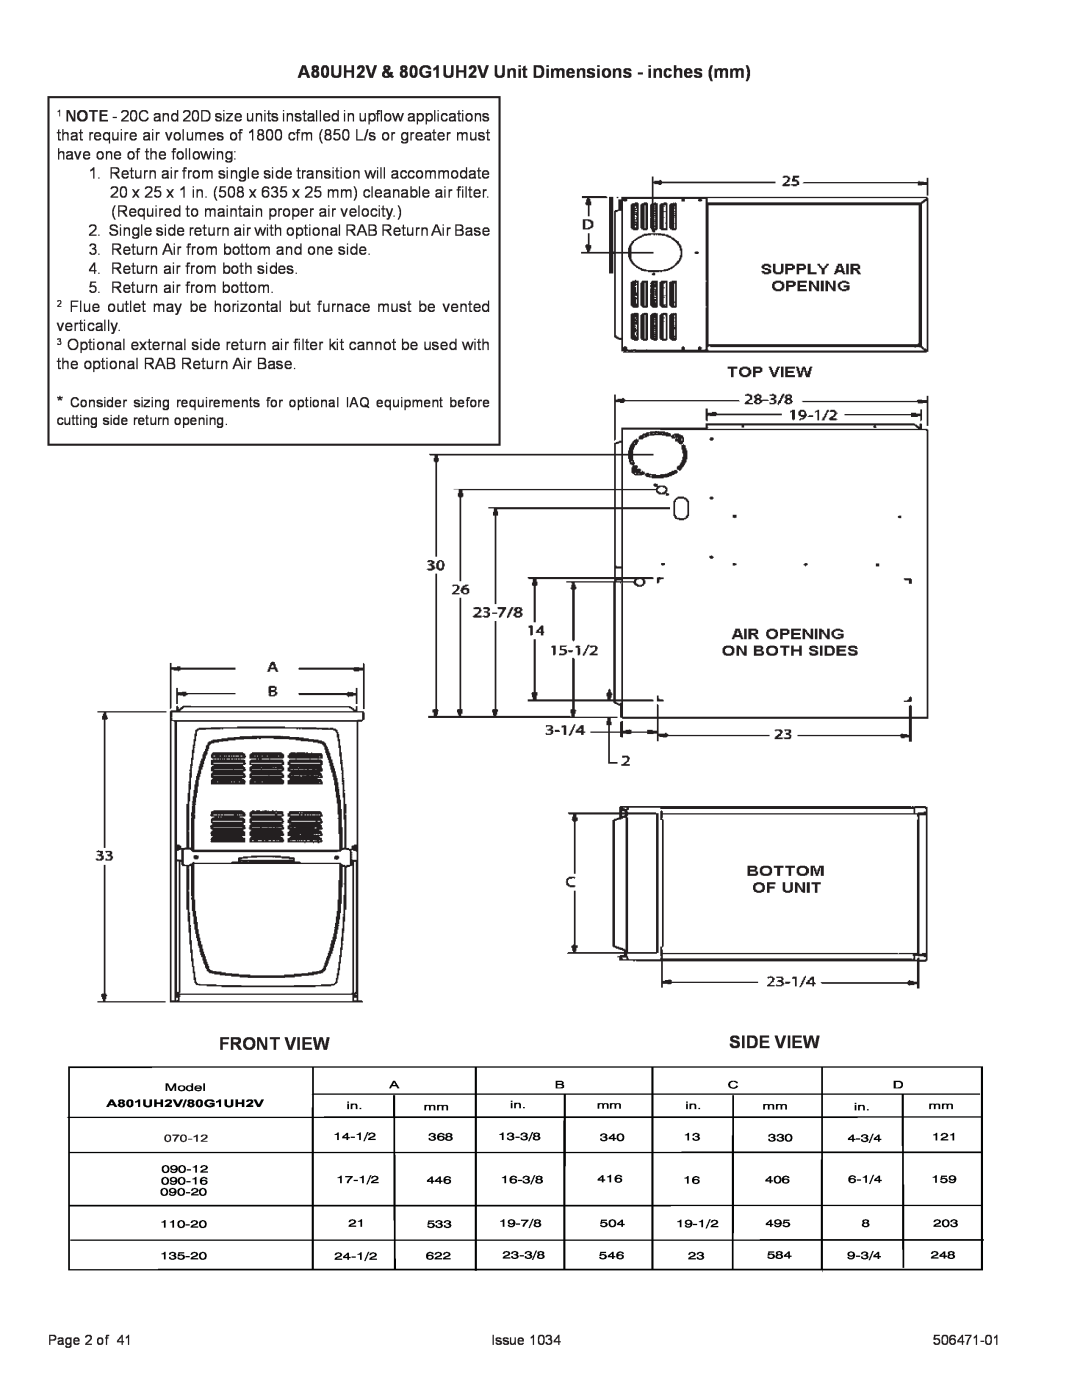 Allied Air Enterprises installation instructions A80UH2V & 80G1UH2V Unit Dimensions - inches mm, Front View, Side View 